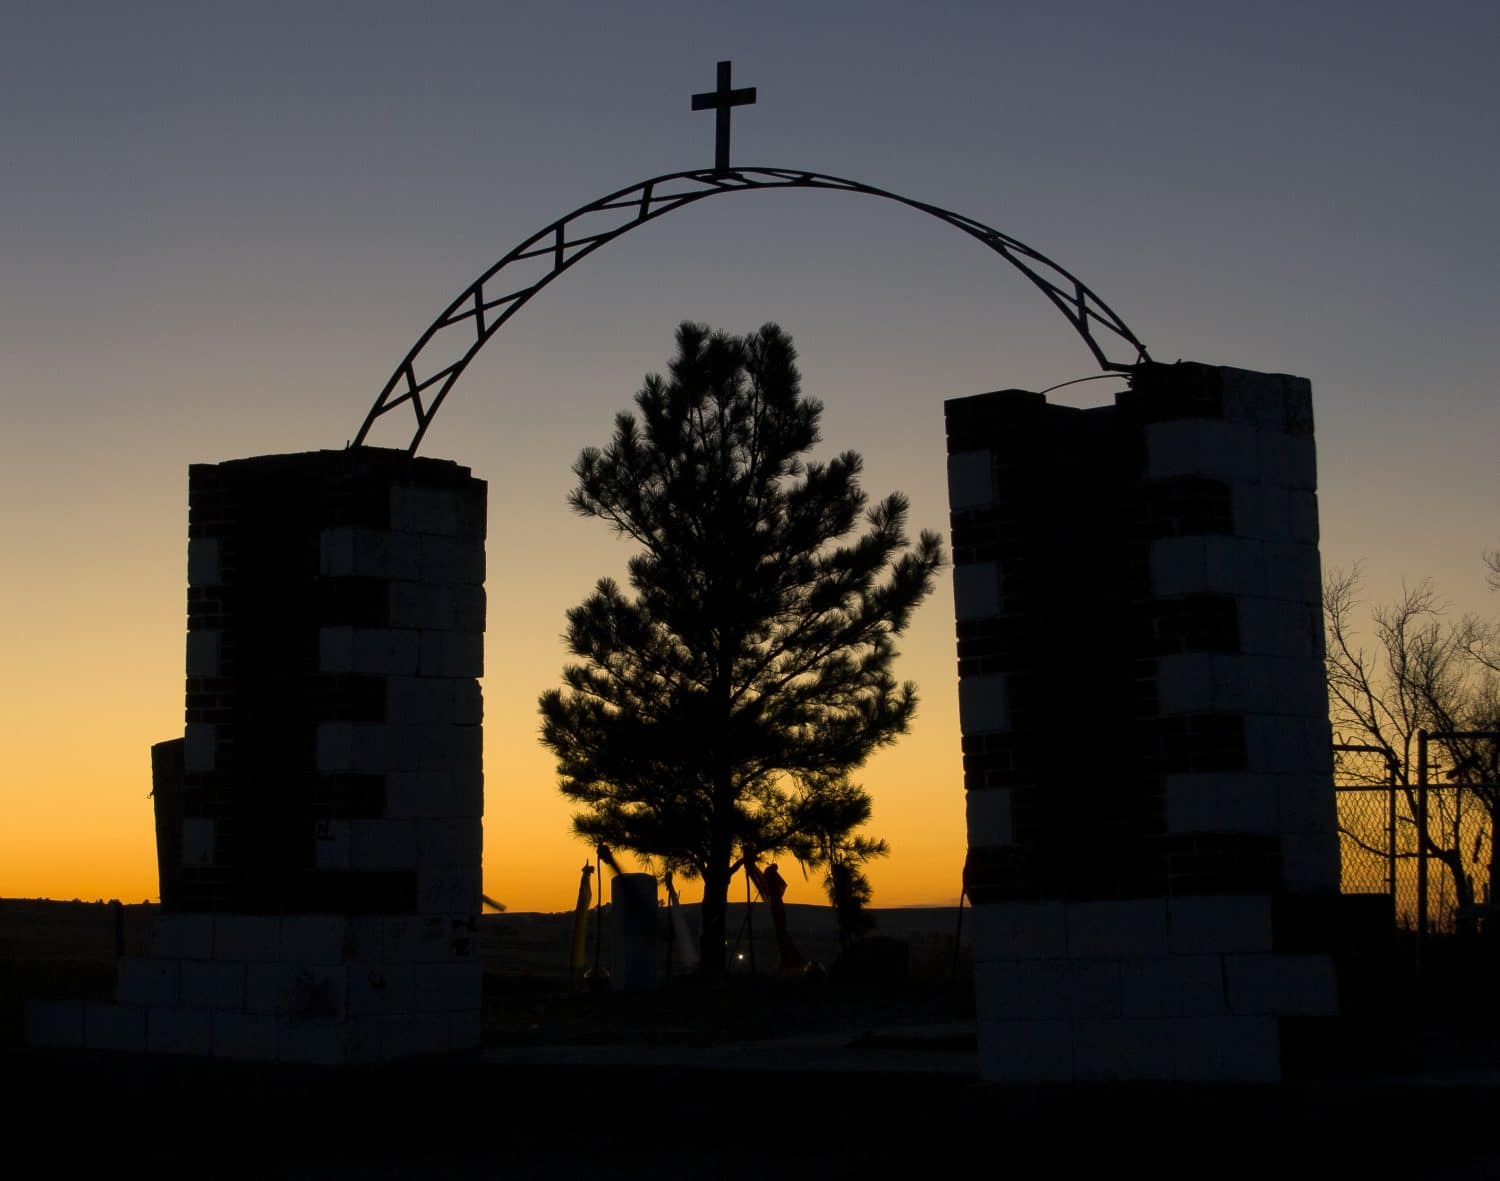 The silhouette of the entrance to the Wounded Knee Massacre Monument in South Dakota at sunset